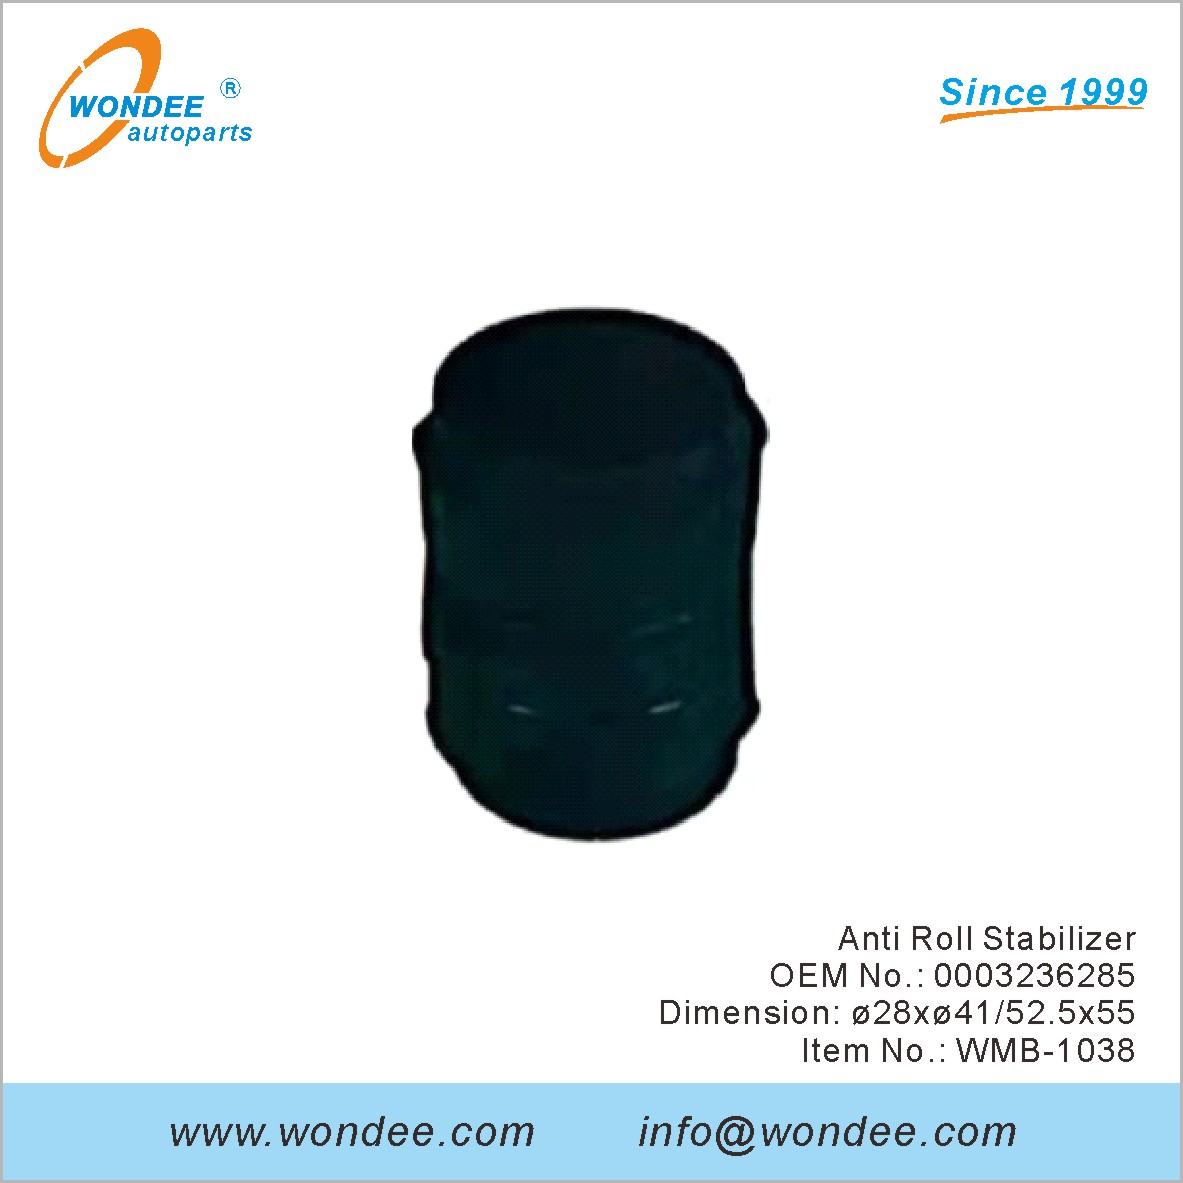 Anti Roll Stabilizer OEM 0003236285 for Benz from WONDEE